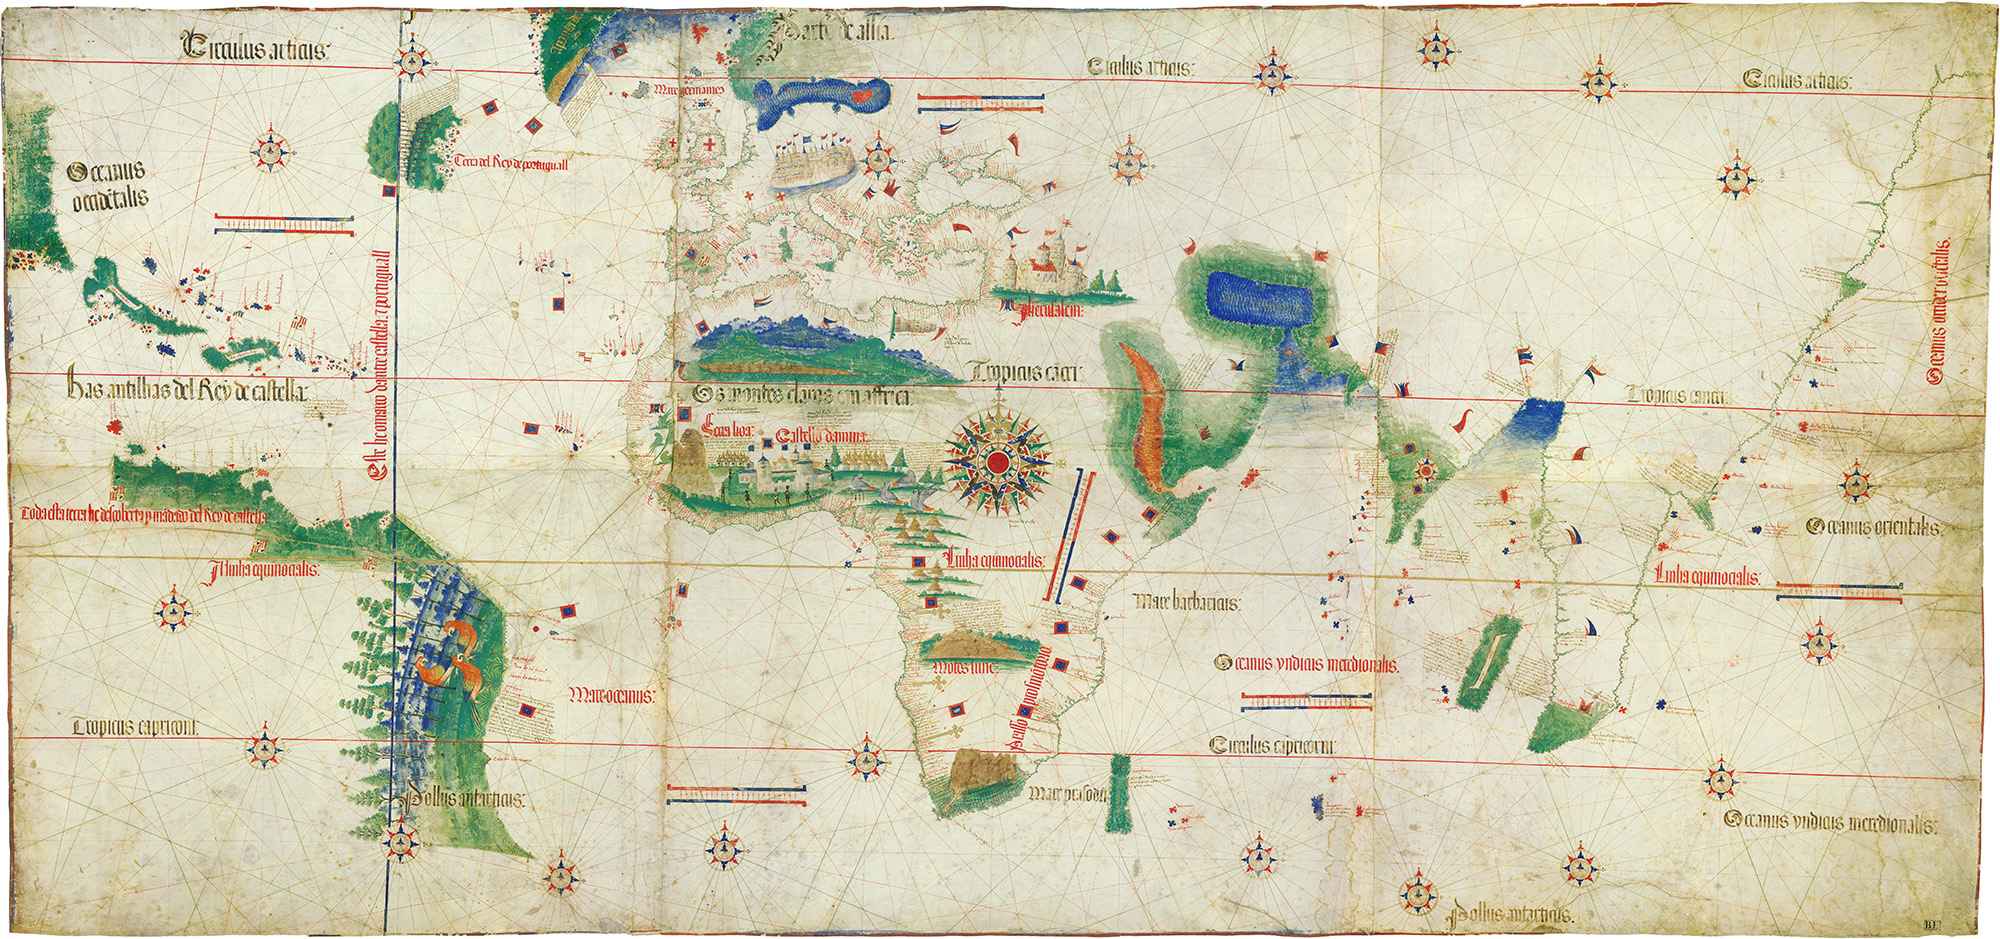 Cover Image: Cantino planisphere(1502)